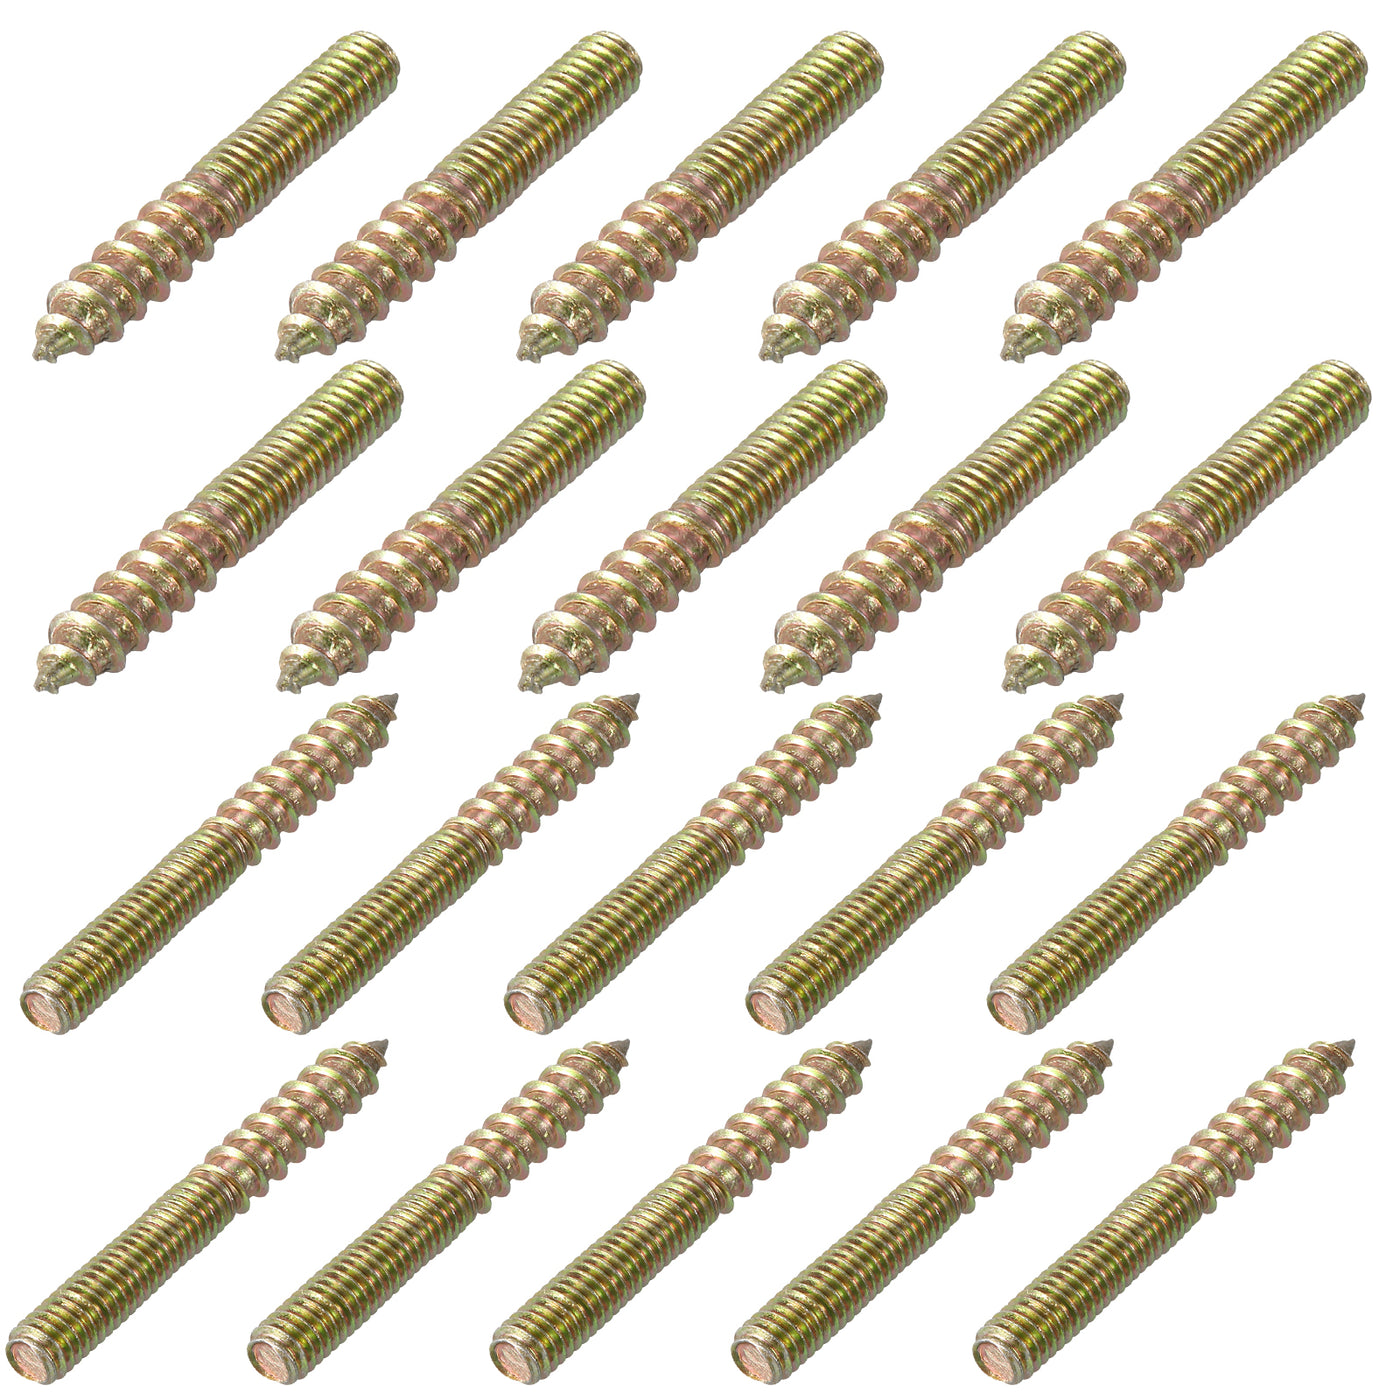 uxcell Uxcell 40Pcs M6x50mm Hanger Bolt Double Headed Bolt Self-Tapping Screw for Furniture